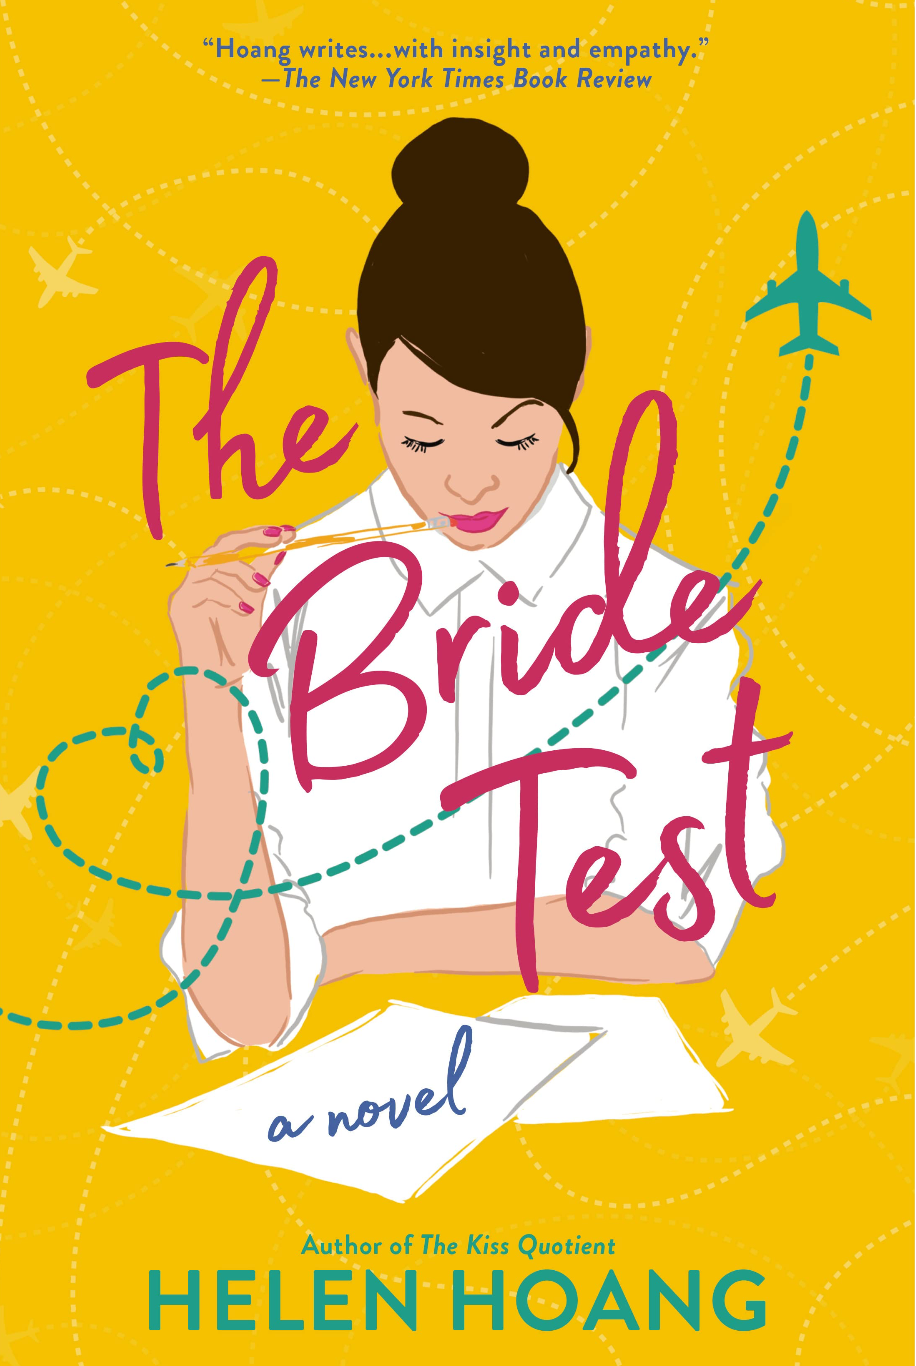 The Bride Test (The Kiss Quotient #3) by Helen Hoang